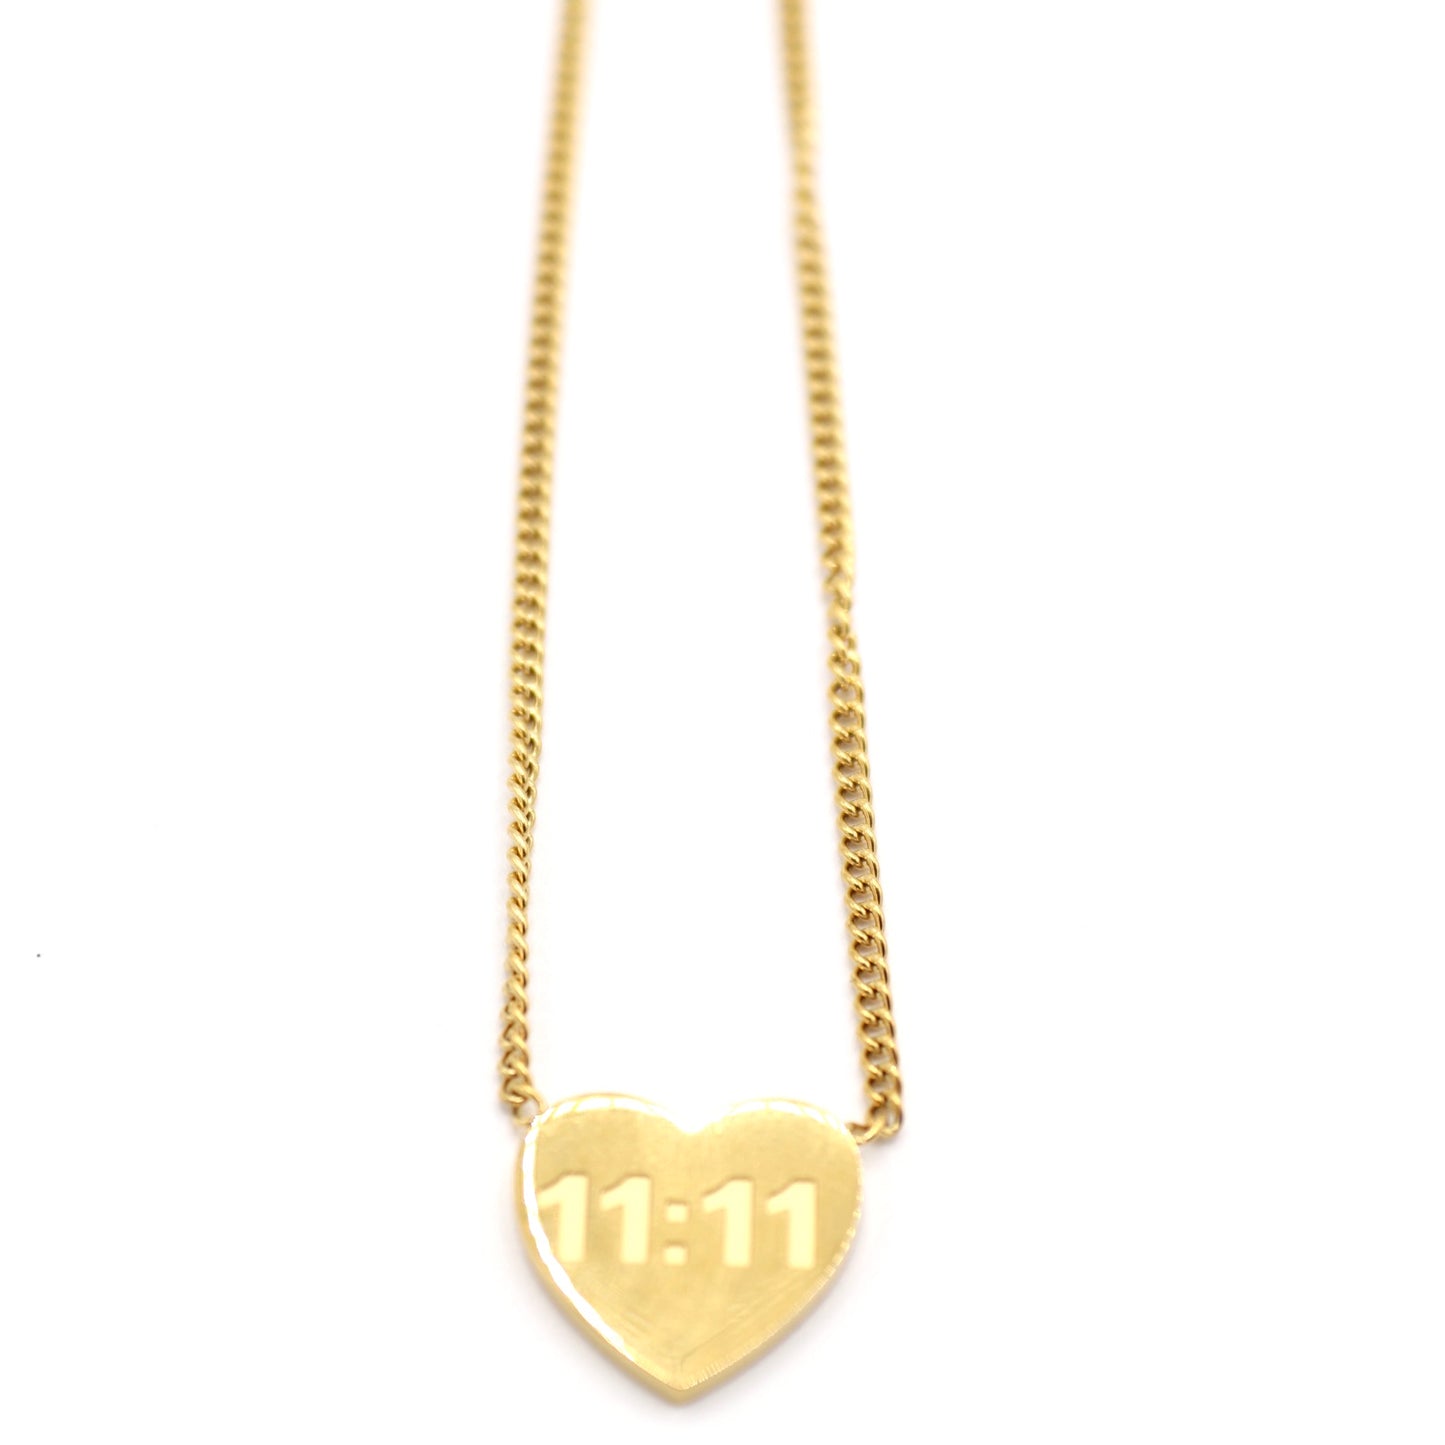 11:11 Angel Numbers Necklace